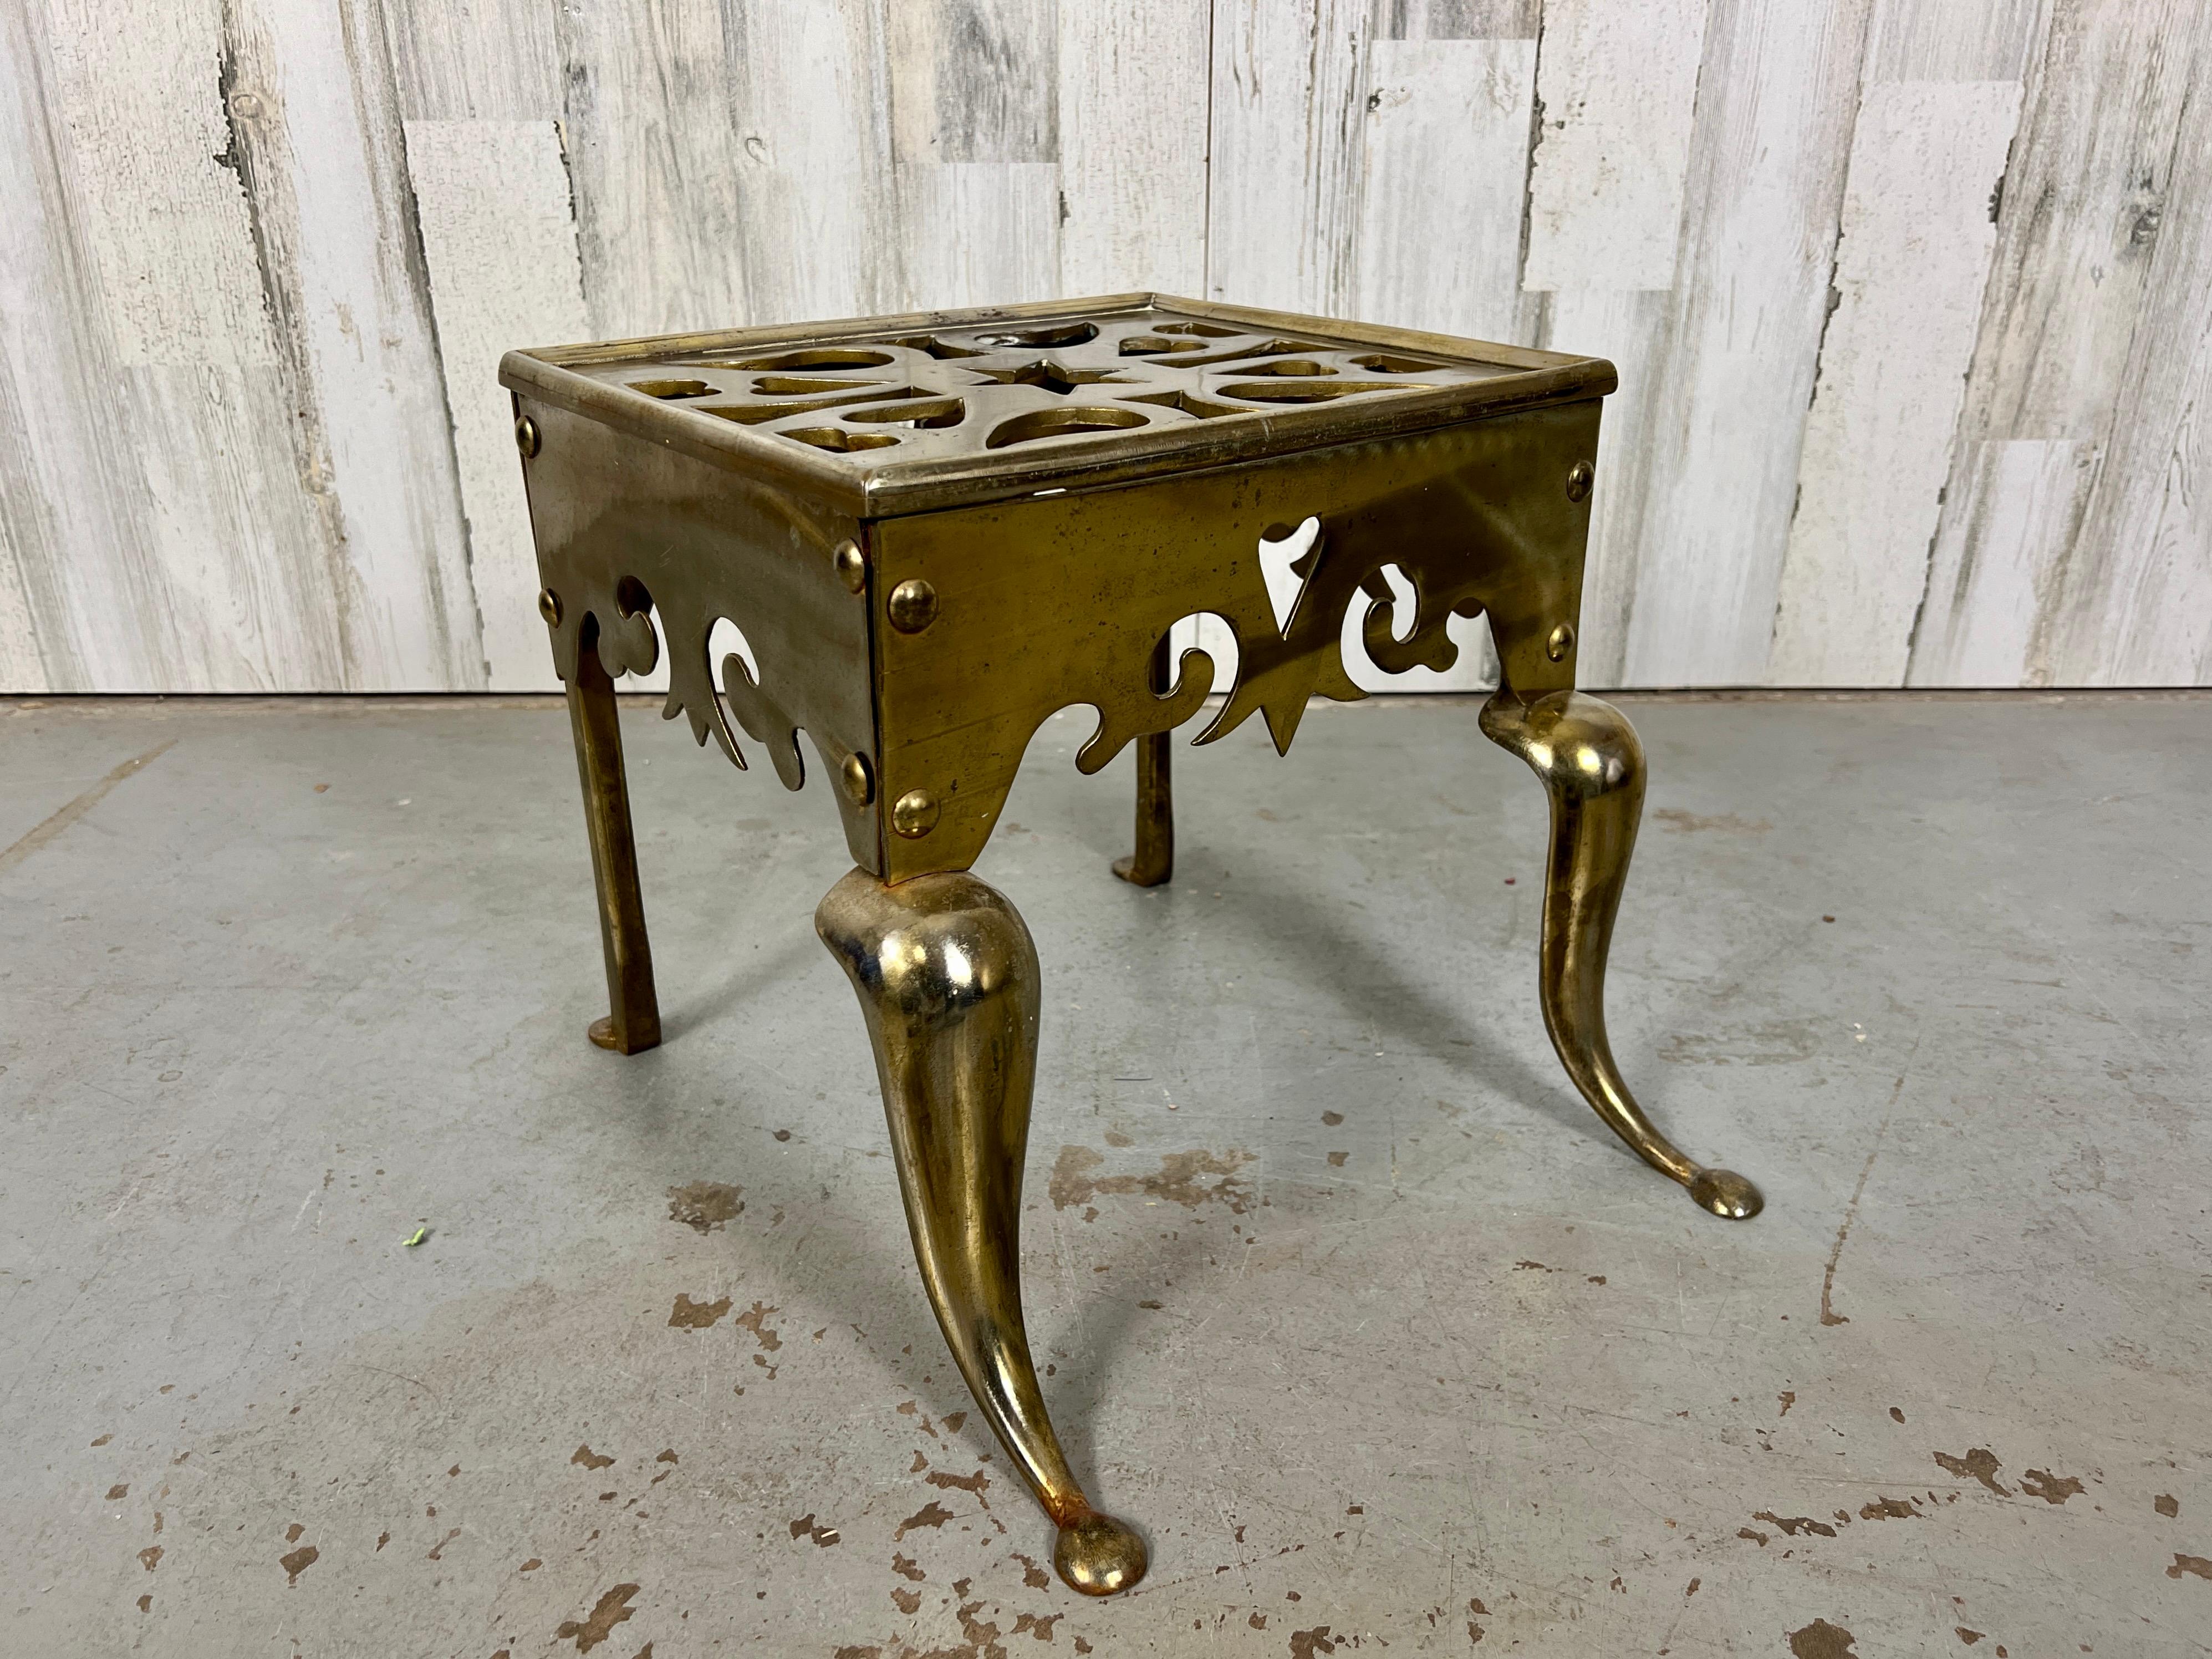 A remarkable fireplace trivet or footman stool crafted in the early 19th century from brass-plated steel. This piece is ideal for serving as a bench or stand, showcasing cabriole front legs and an intricate leaf pattern design on the top.